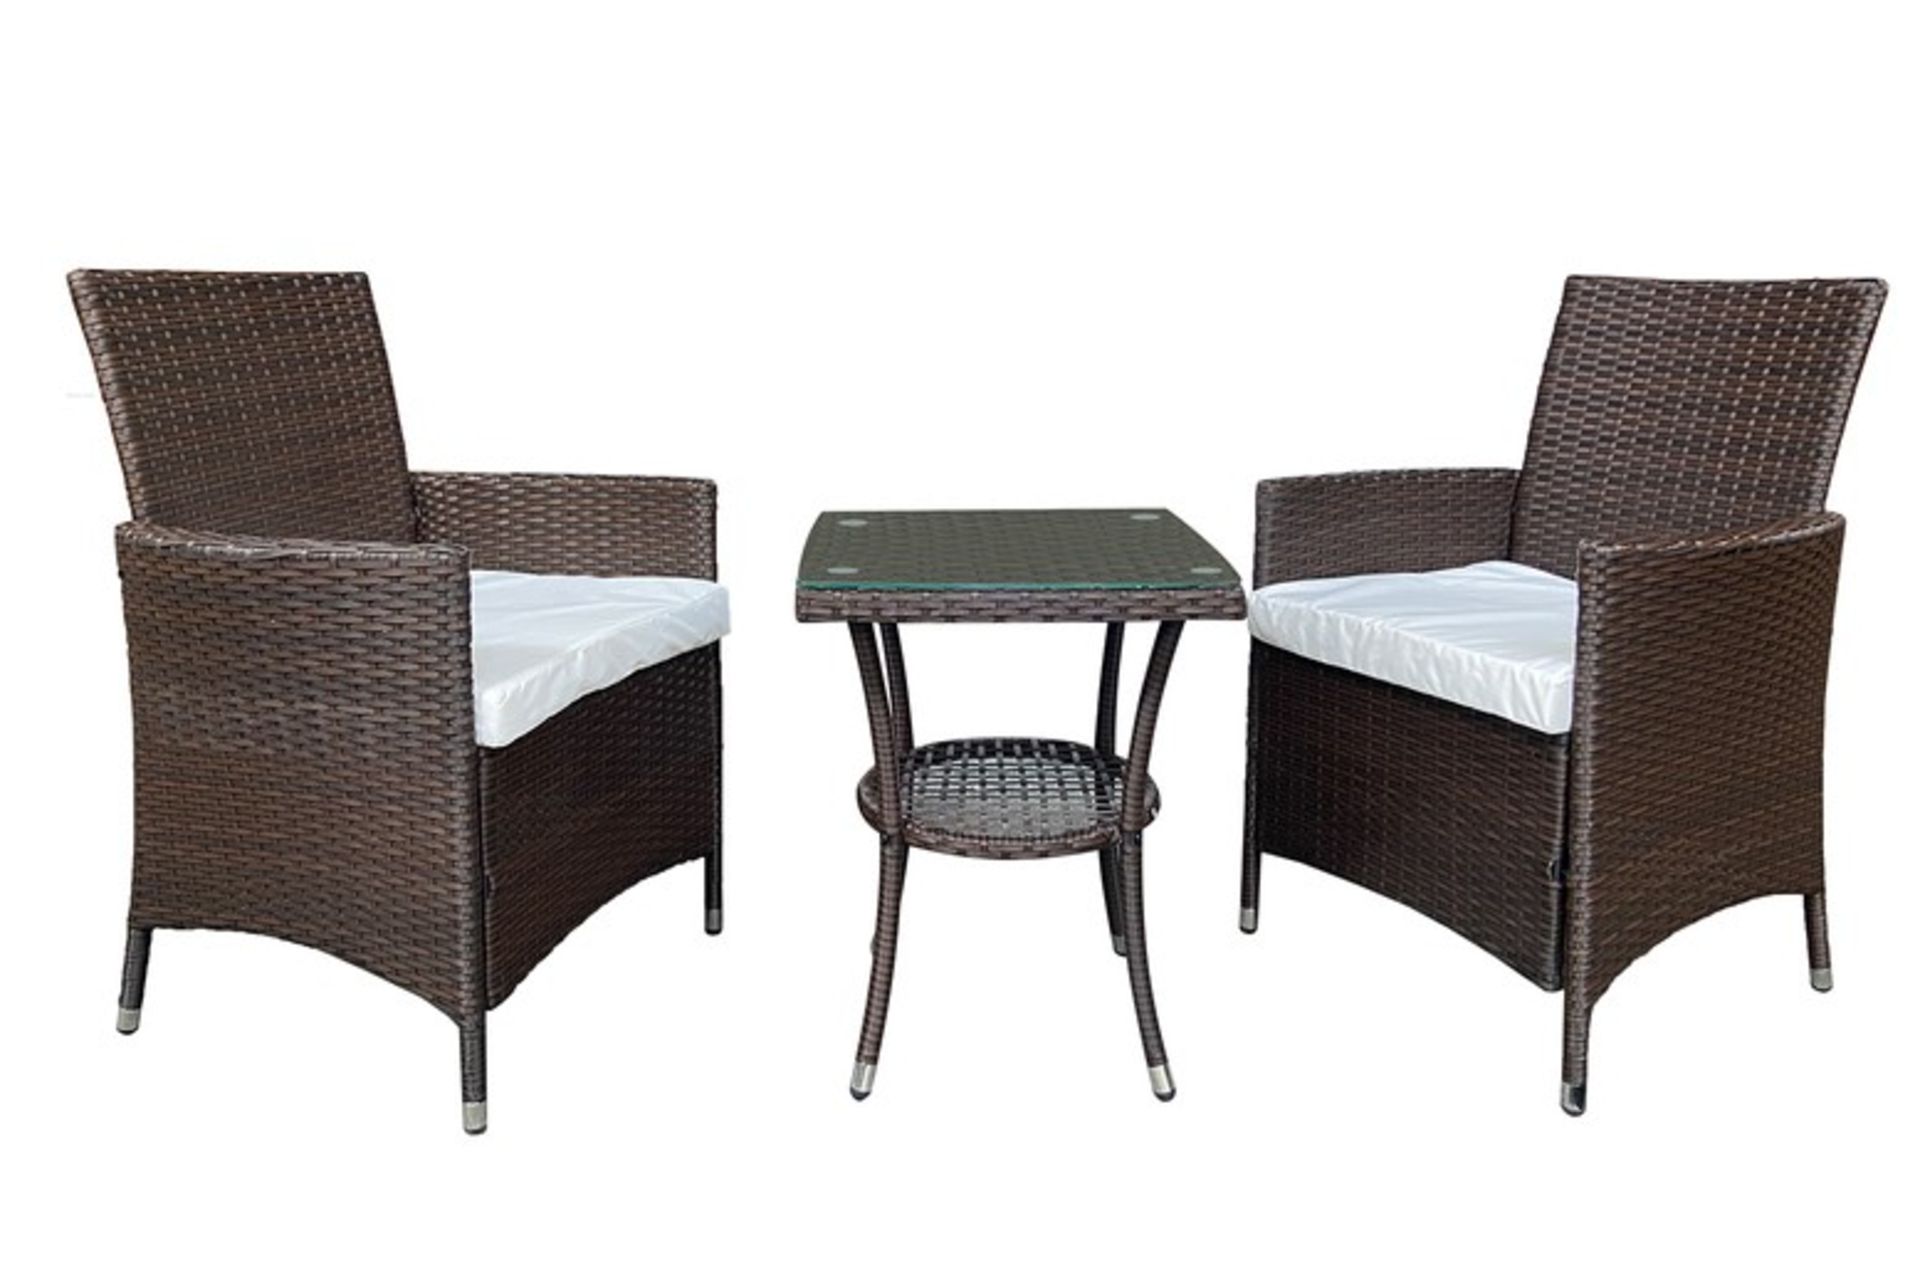 FREE DELIVERY - JOB LOT OF 5X 2-SEATER RATTAN BISTRO GARDEN FURNITURE SET - BROWN